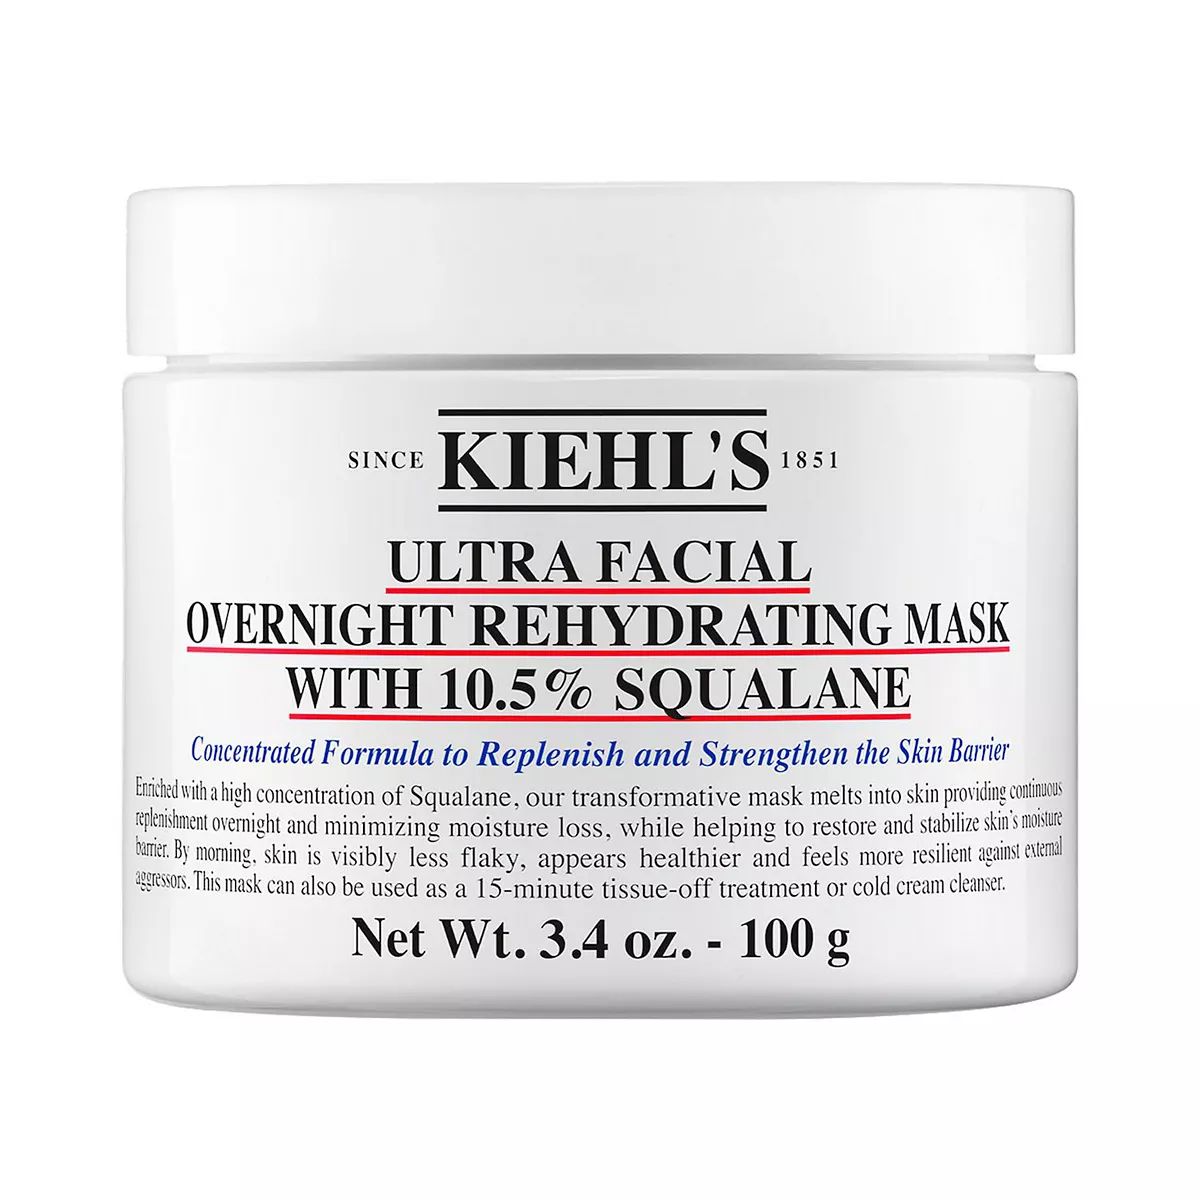 Kiehl's Since 1851 Ultra Facial Overnight Hydrating Face Mask with 10.5% Squalane | Kohl's